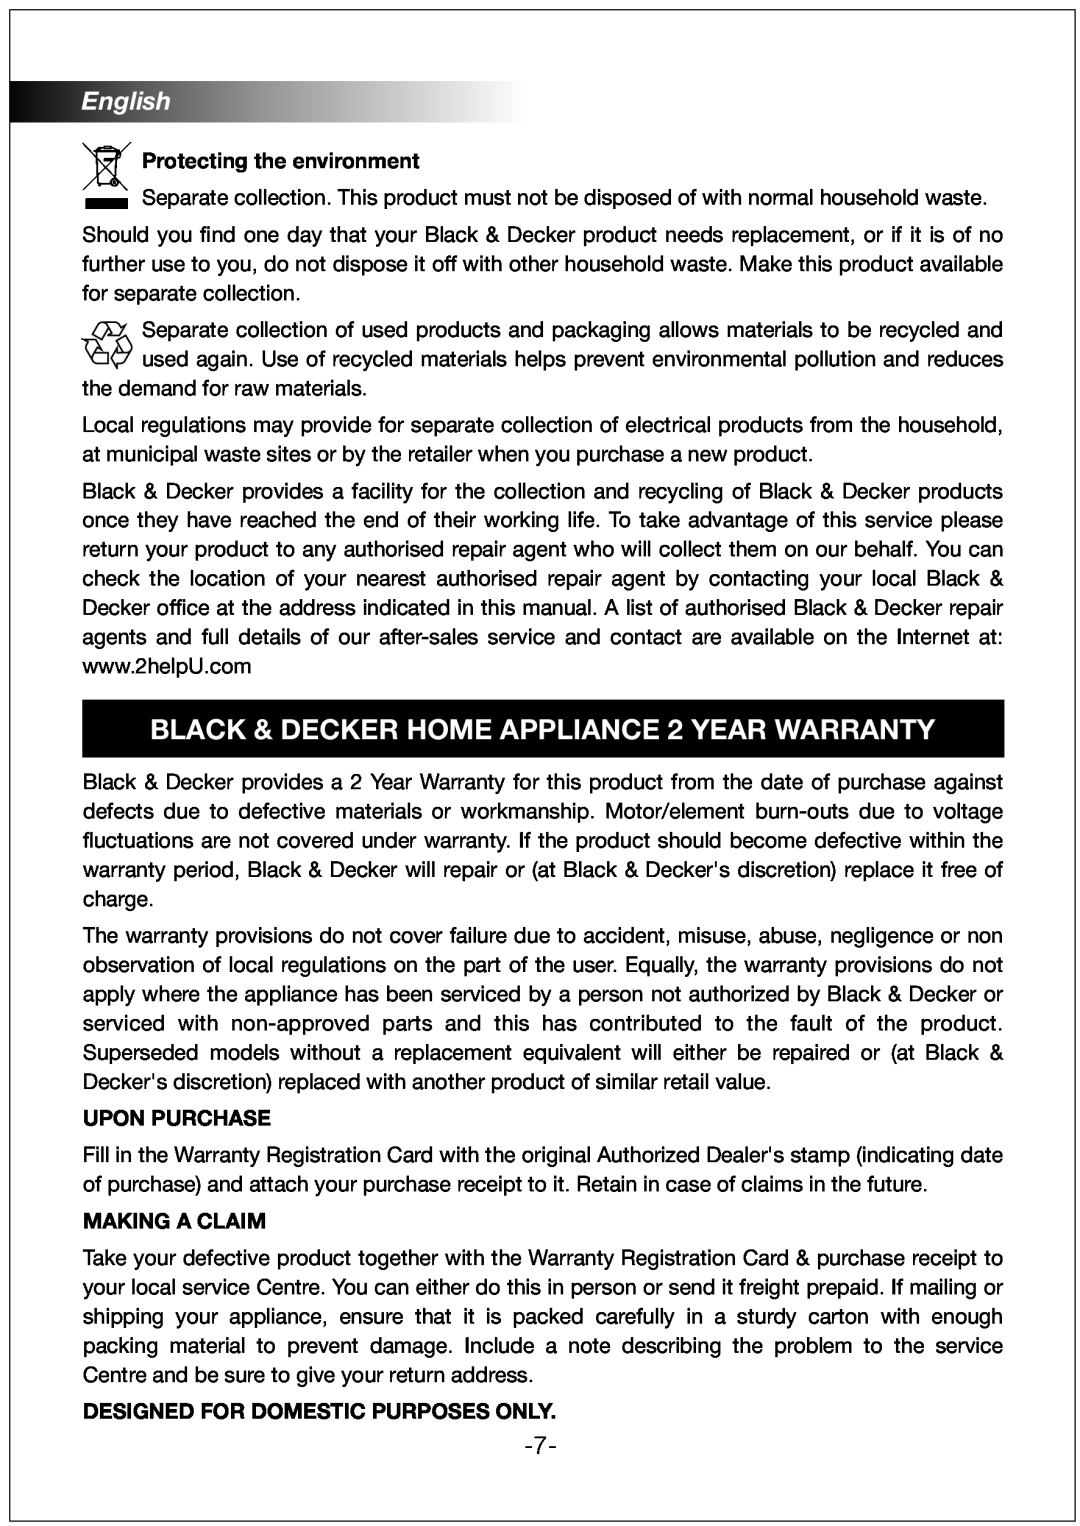 Black & Decker JC100 BLACK & DECKER HOME APPLIANCE 2 YEAR WARRANTY, English, Protecting the environment, Upon Purchase 